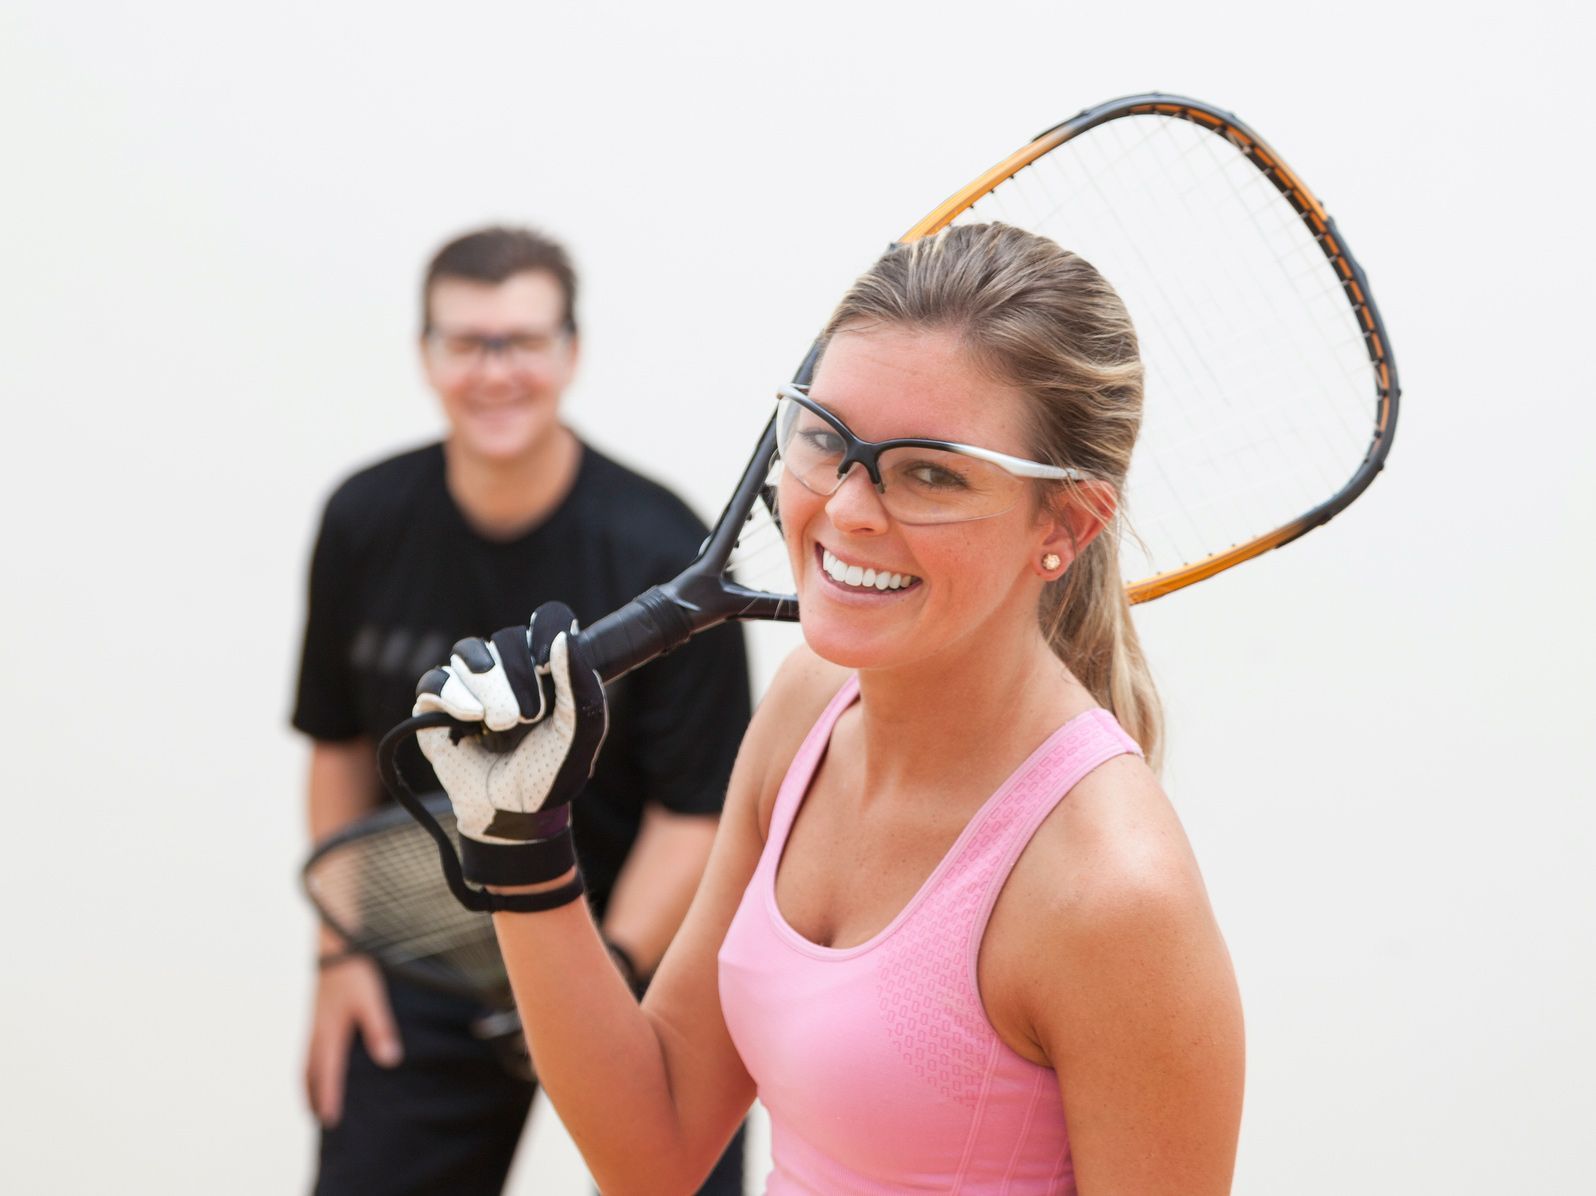 Choosing Protective Eyewear for Sports: Keep Your Eyes Safe